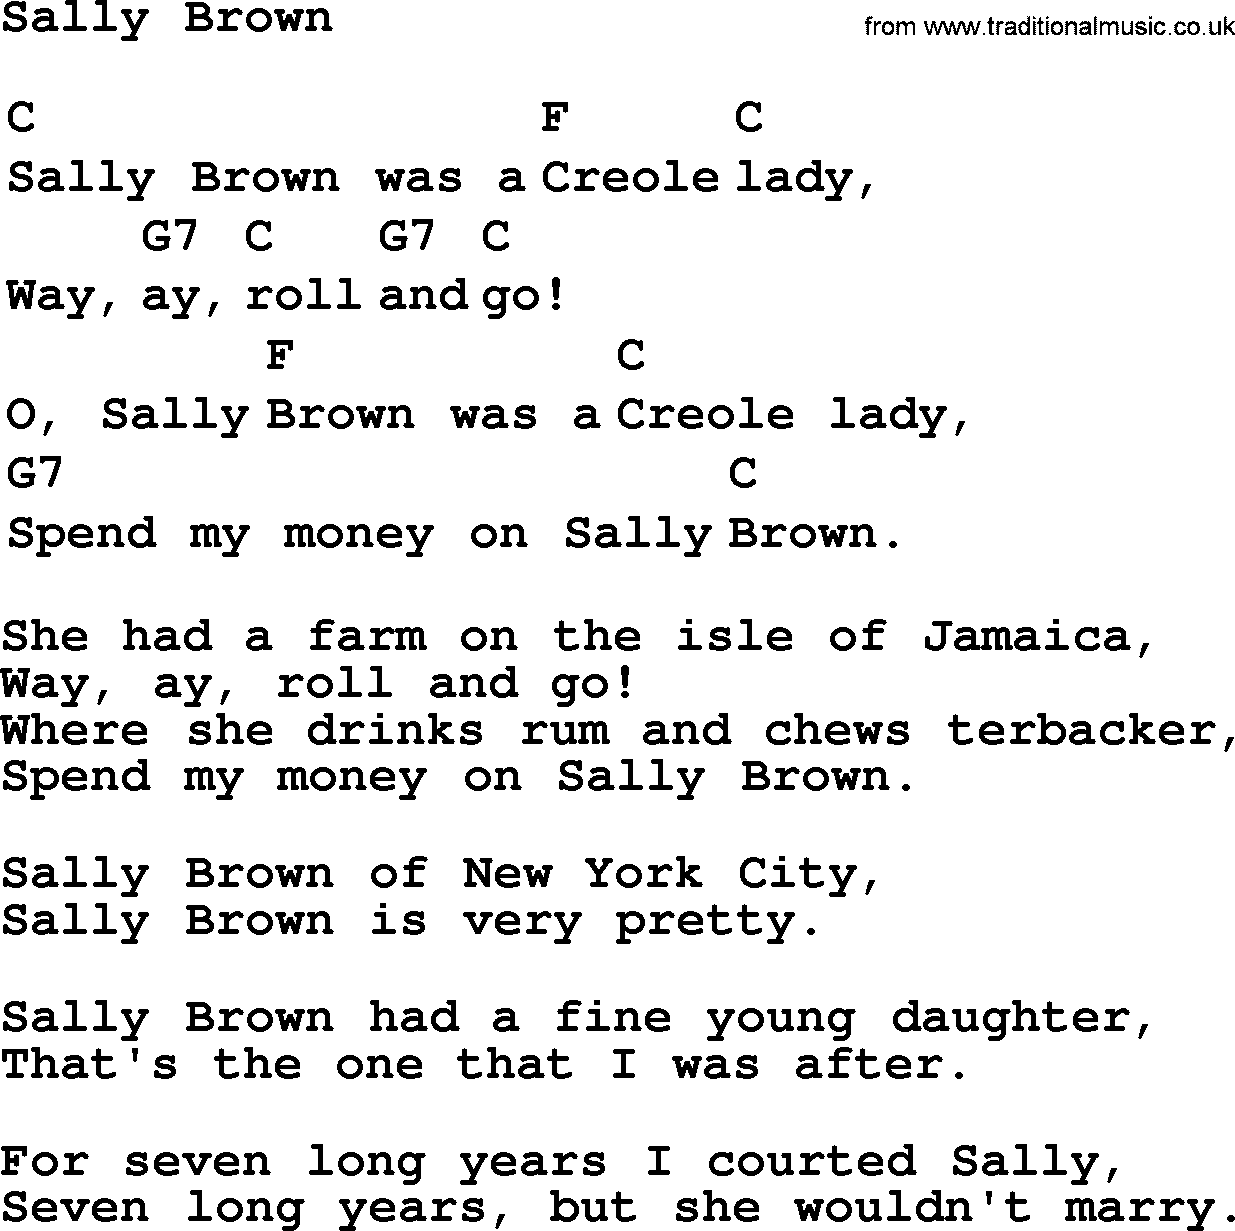 Top 1000 Most Popular Folk and Old-time Songs: Sally Brown, lyrics and chords